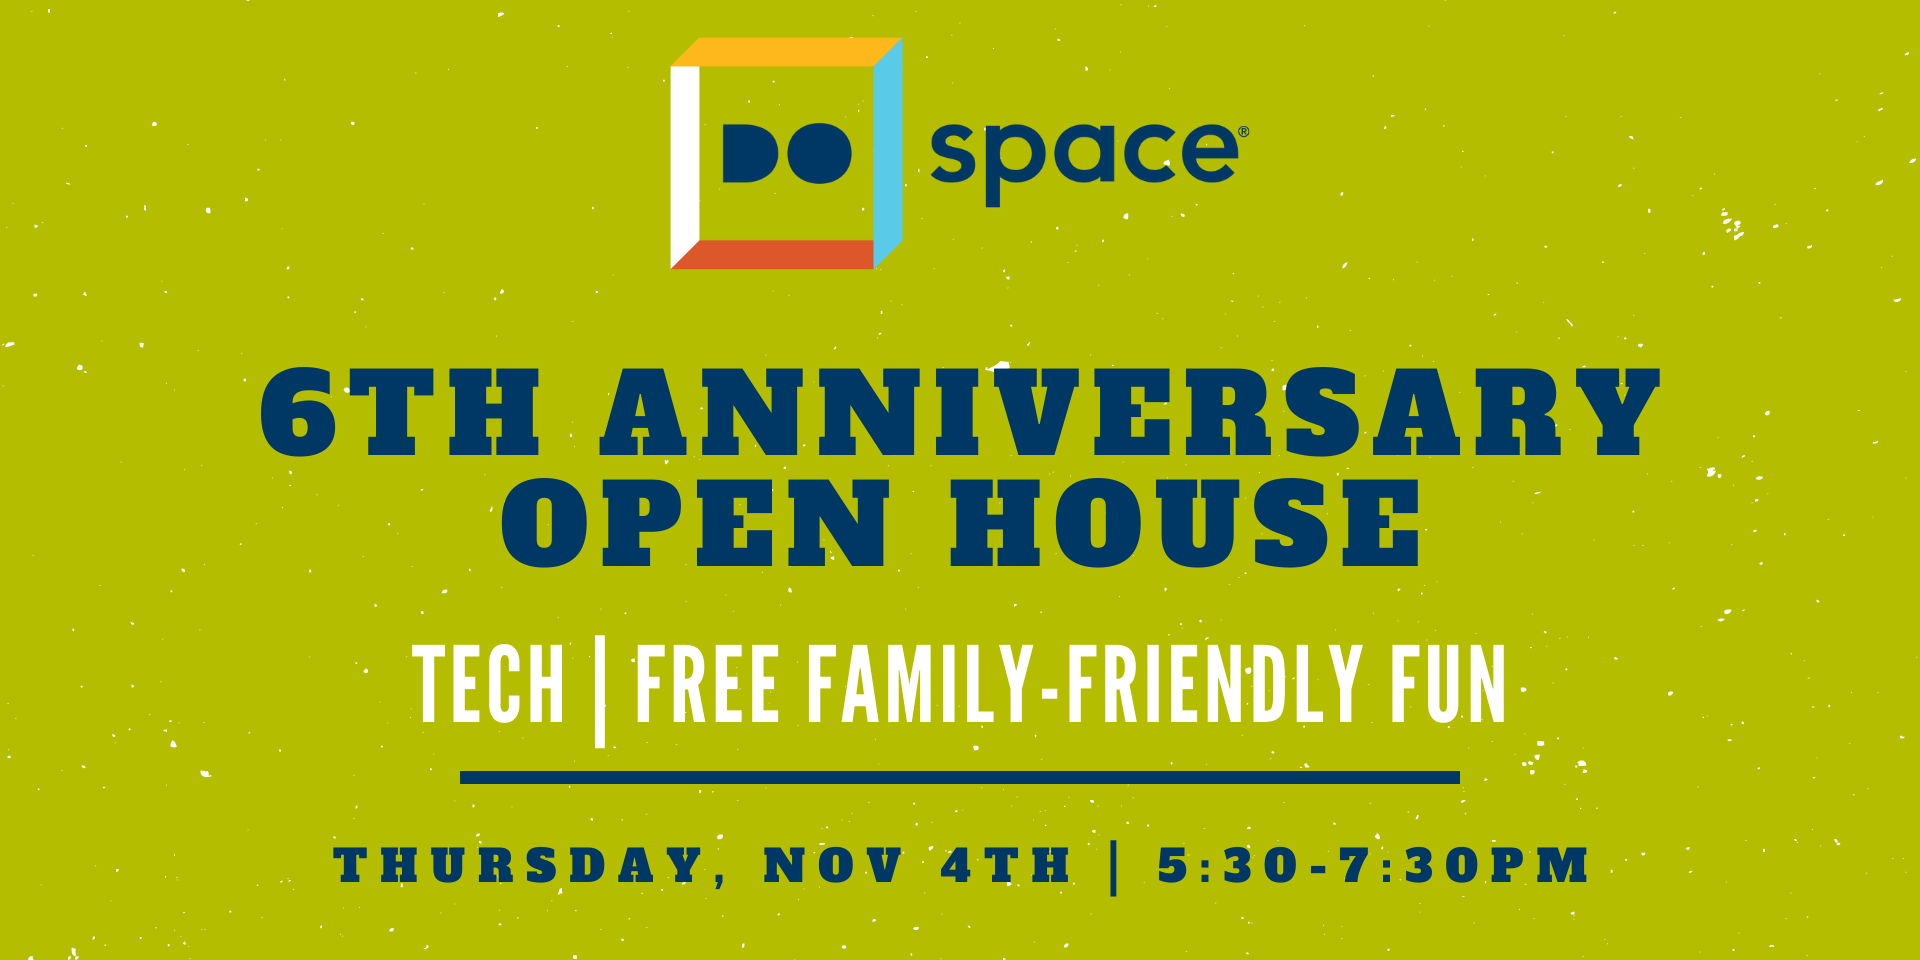 Do Space 6th Anniversary Open House promotional image